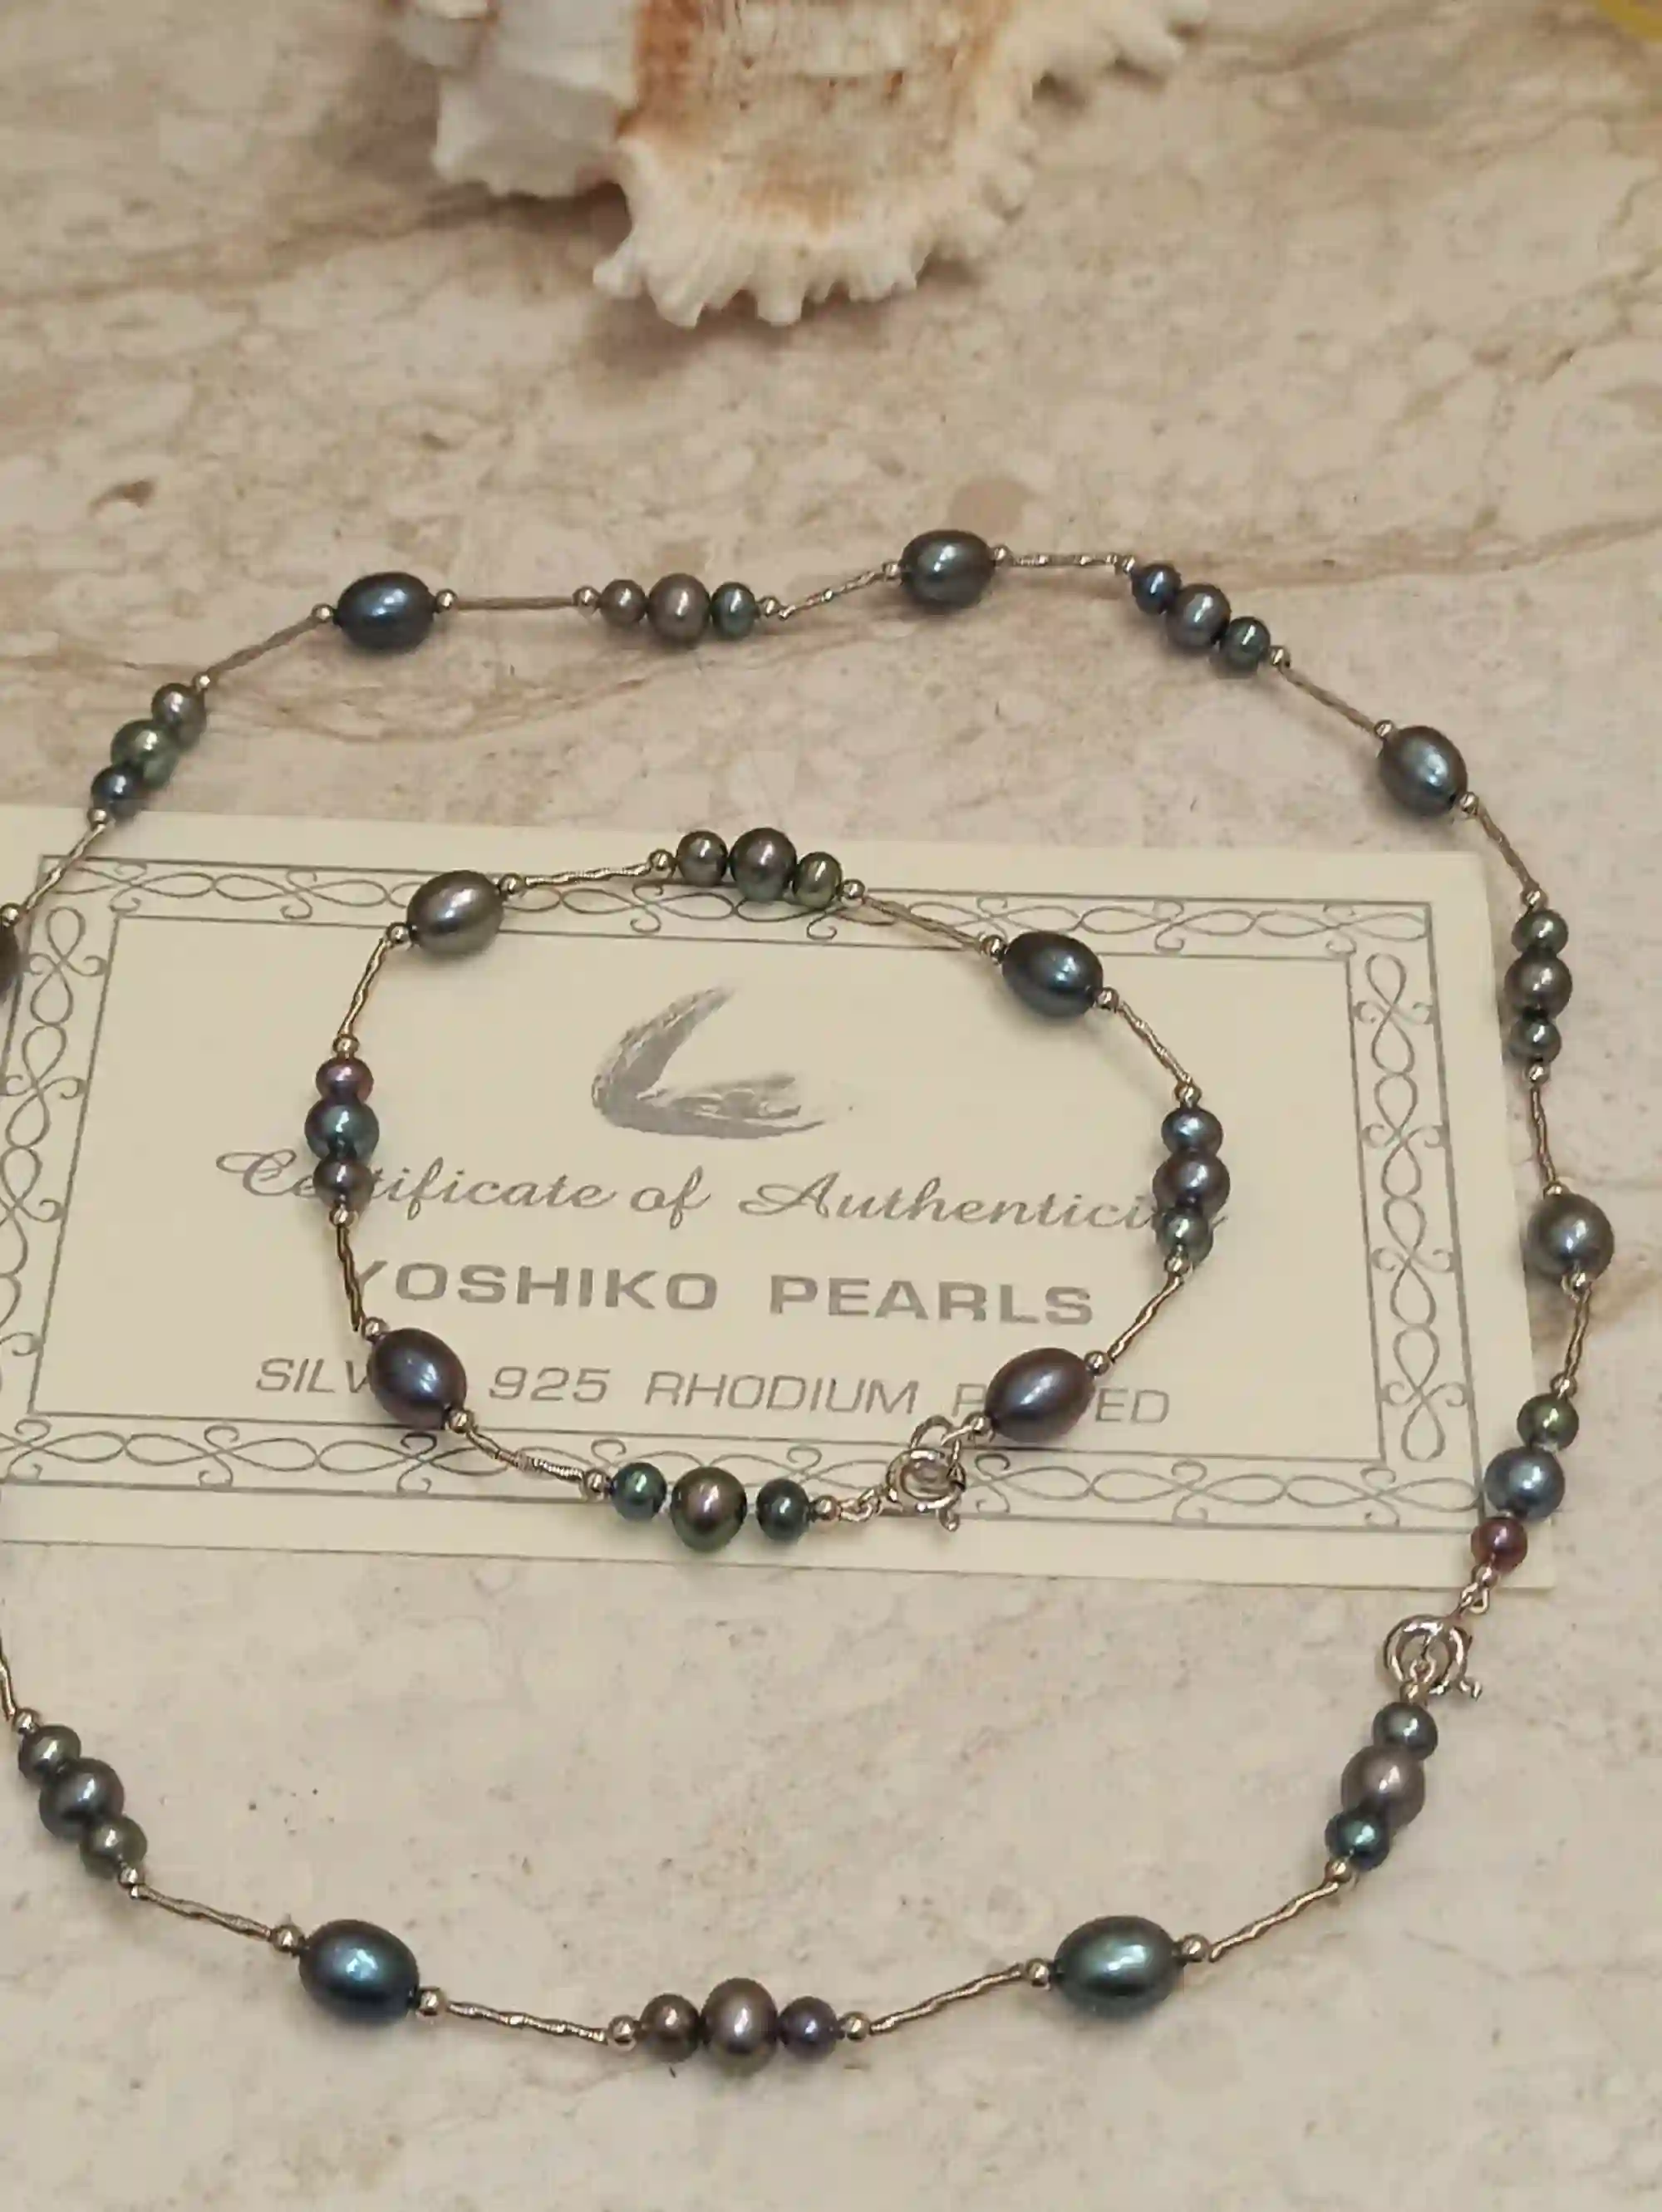 Japanese Pearl Necklace Set -Tahitian Real Pearl Jewelry- Baroque Grey Pearl Necklace -Sterling Silver 925-Fine Jewelry for women- HANDMADE 